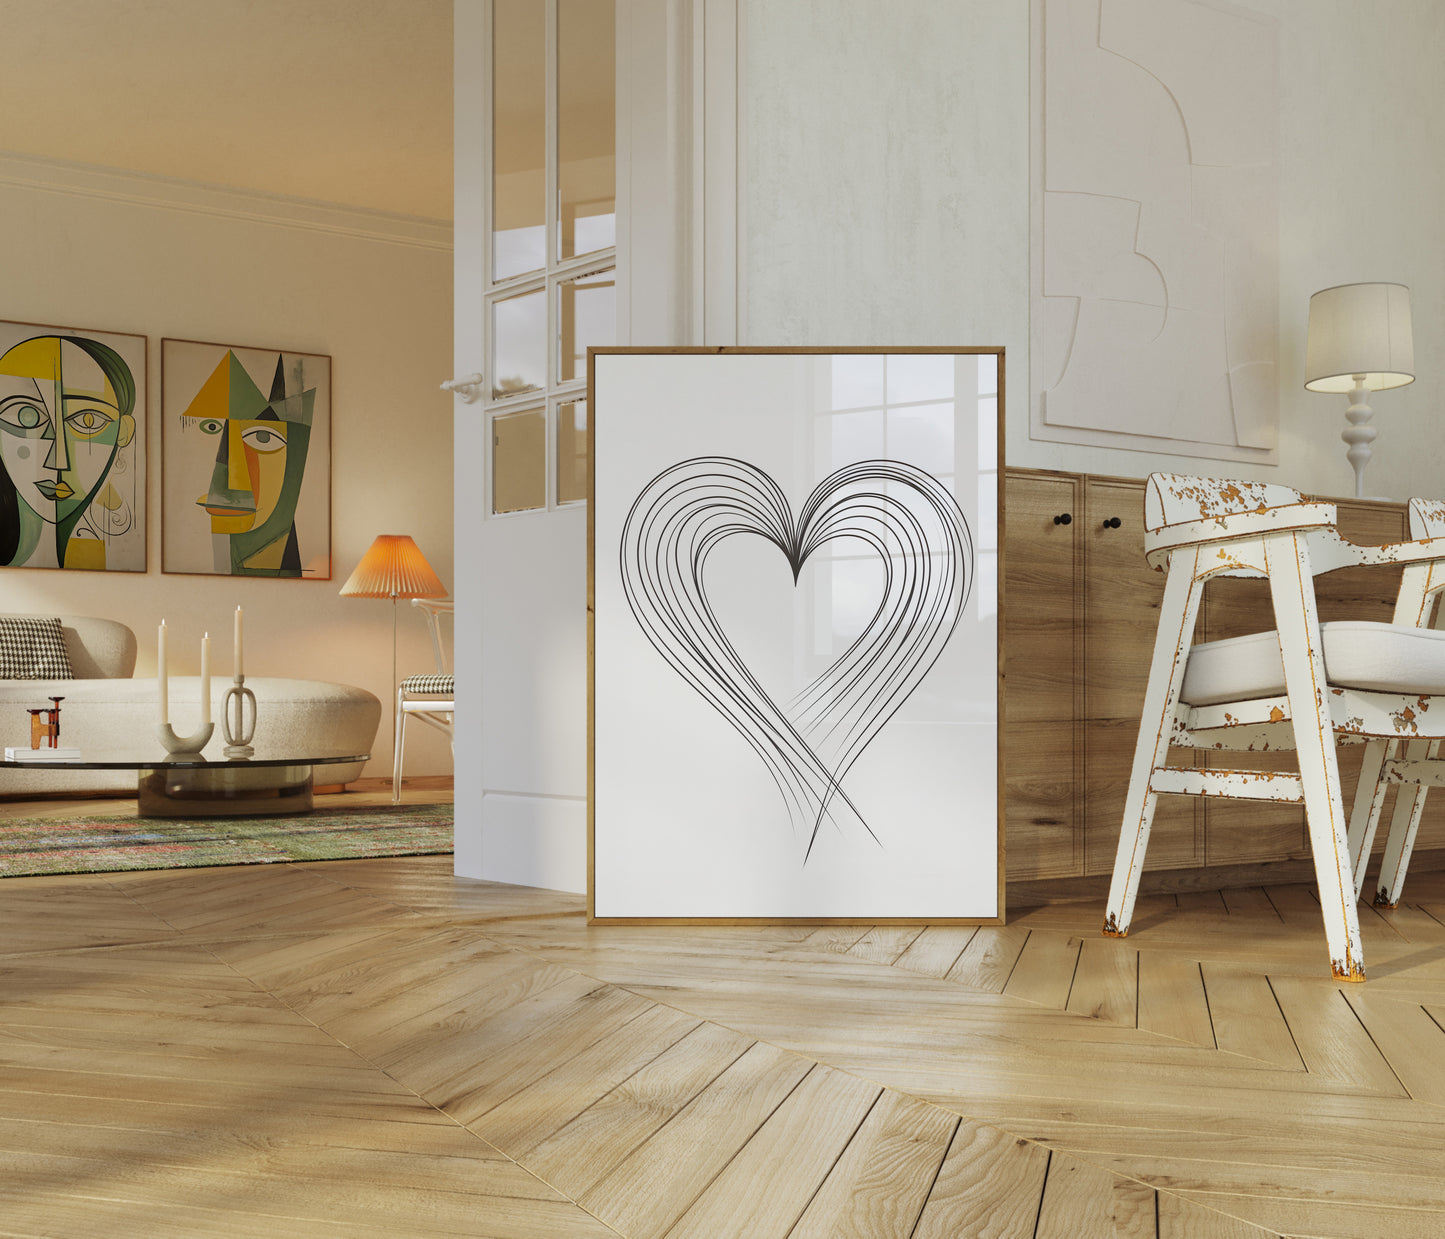 A modern living room with a large heart sketch leaning against a wall.